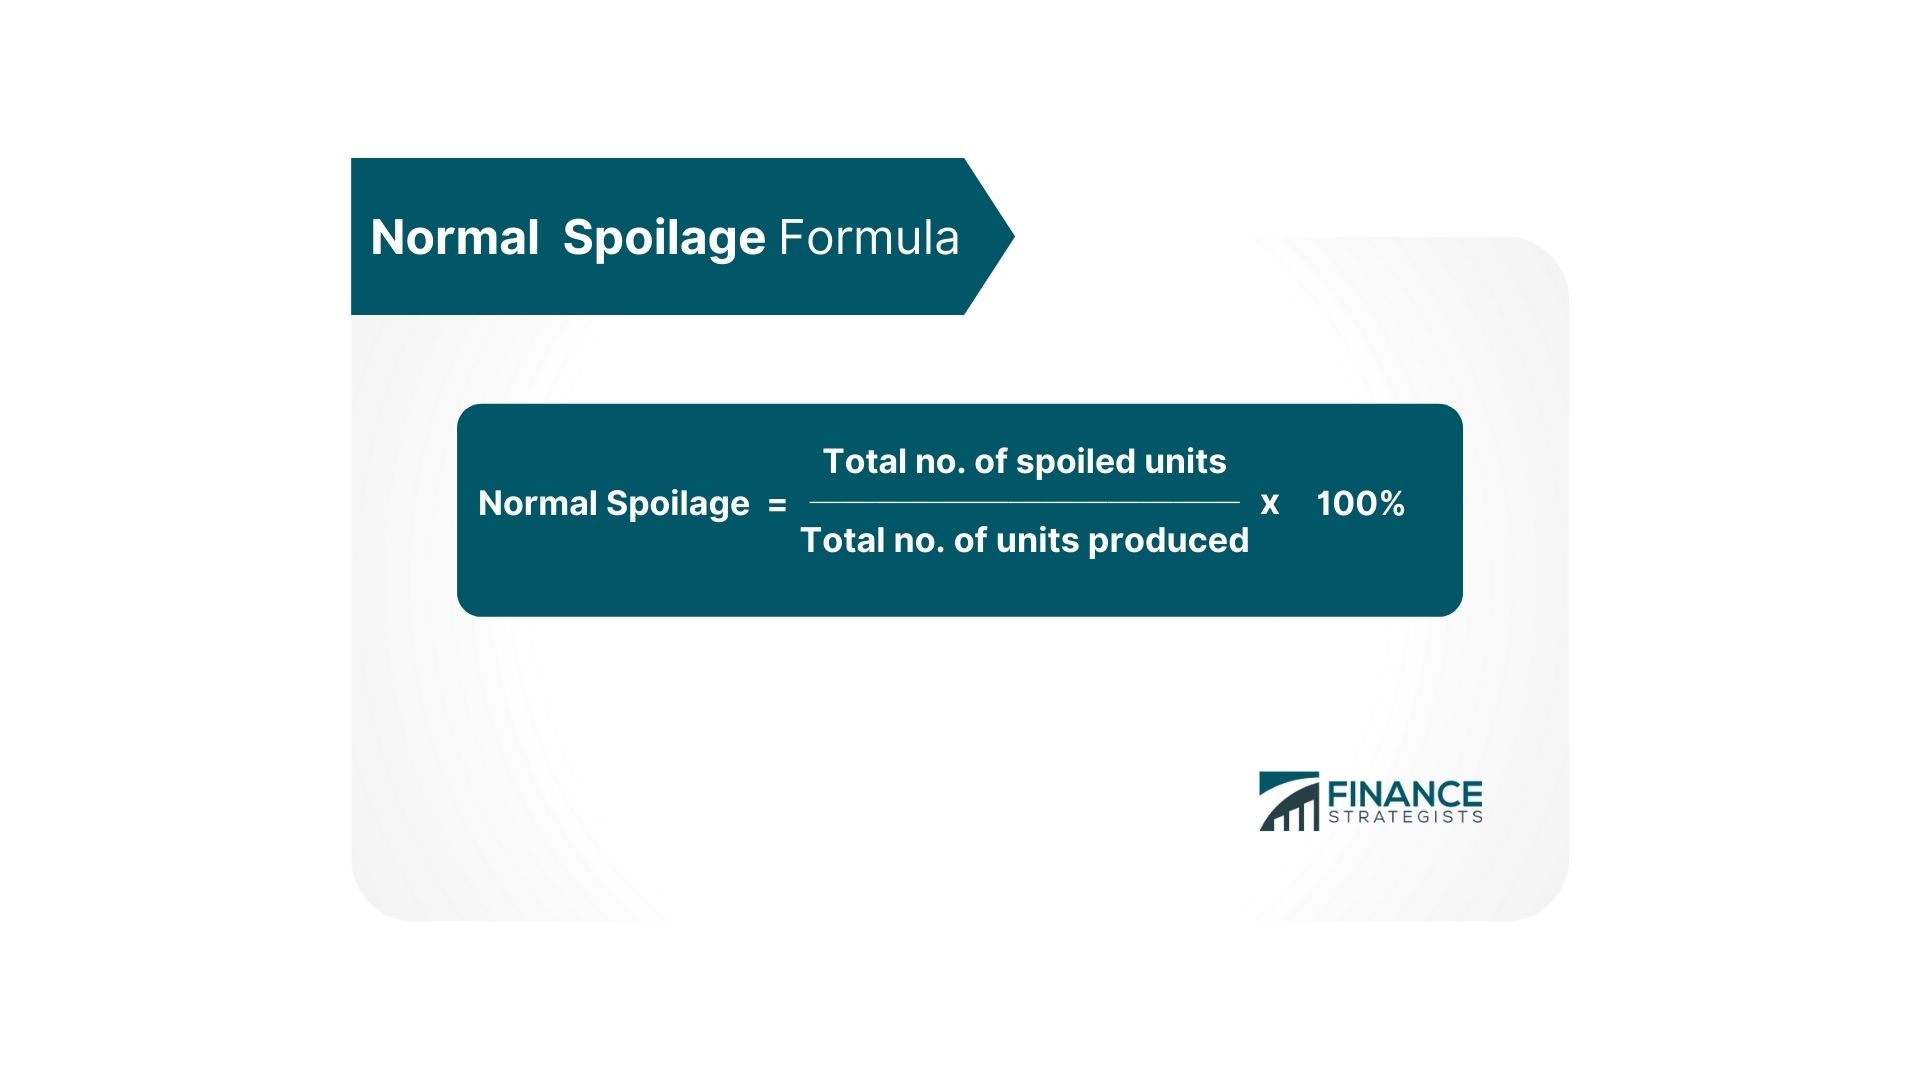 What is Abnormal Spoilage?